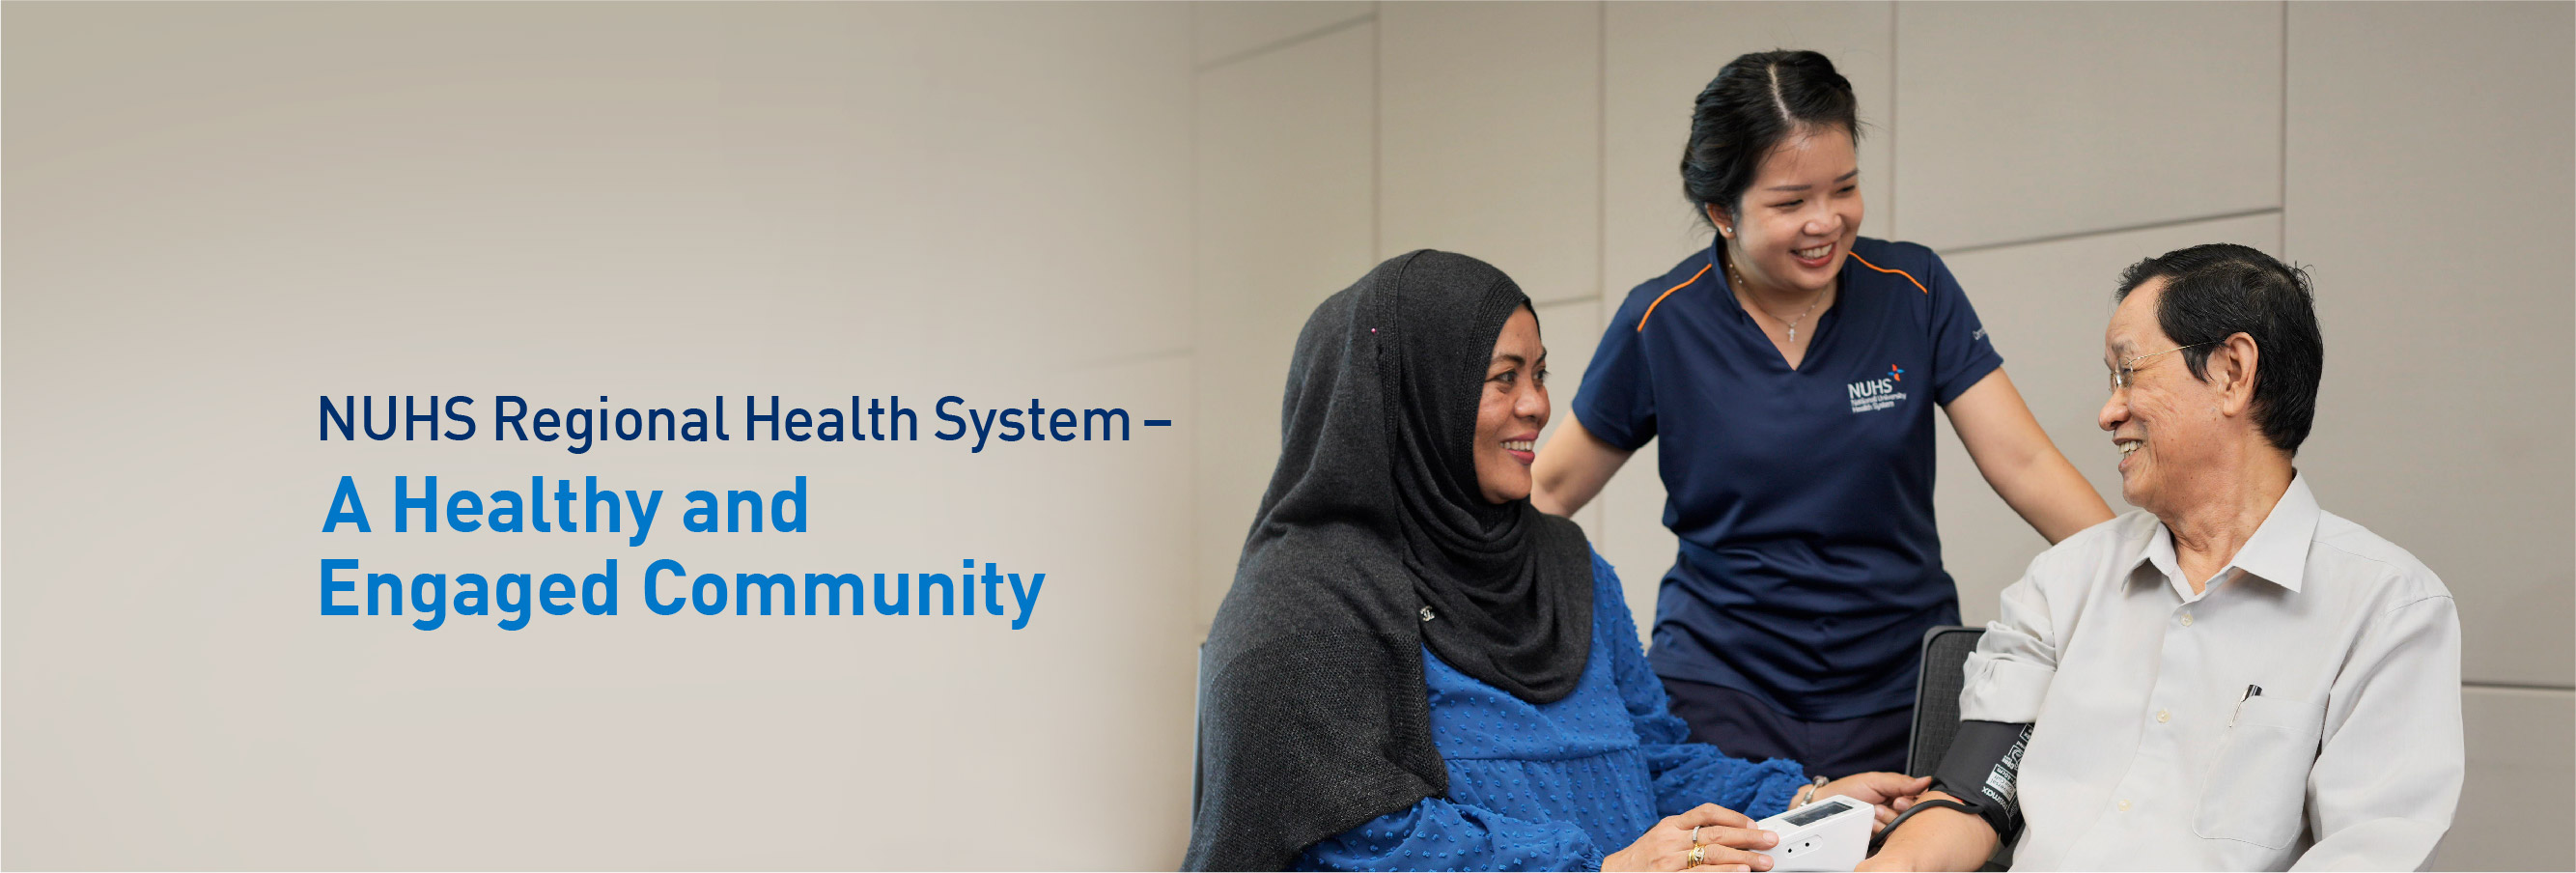 NUHS Regional Health System - Care in the Community